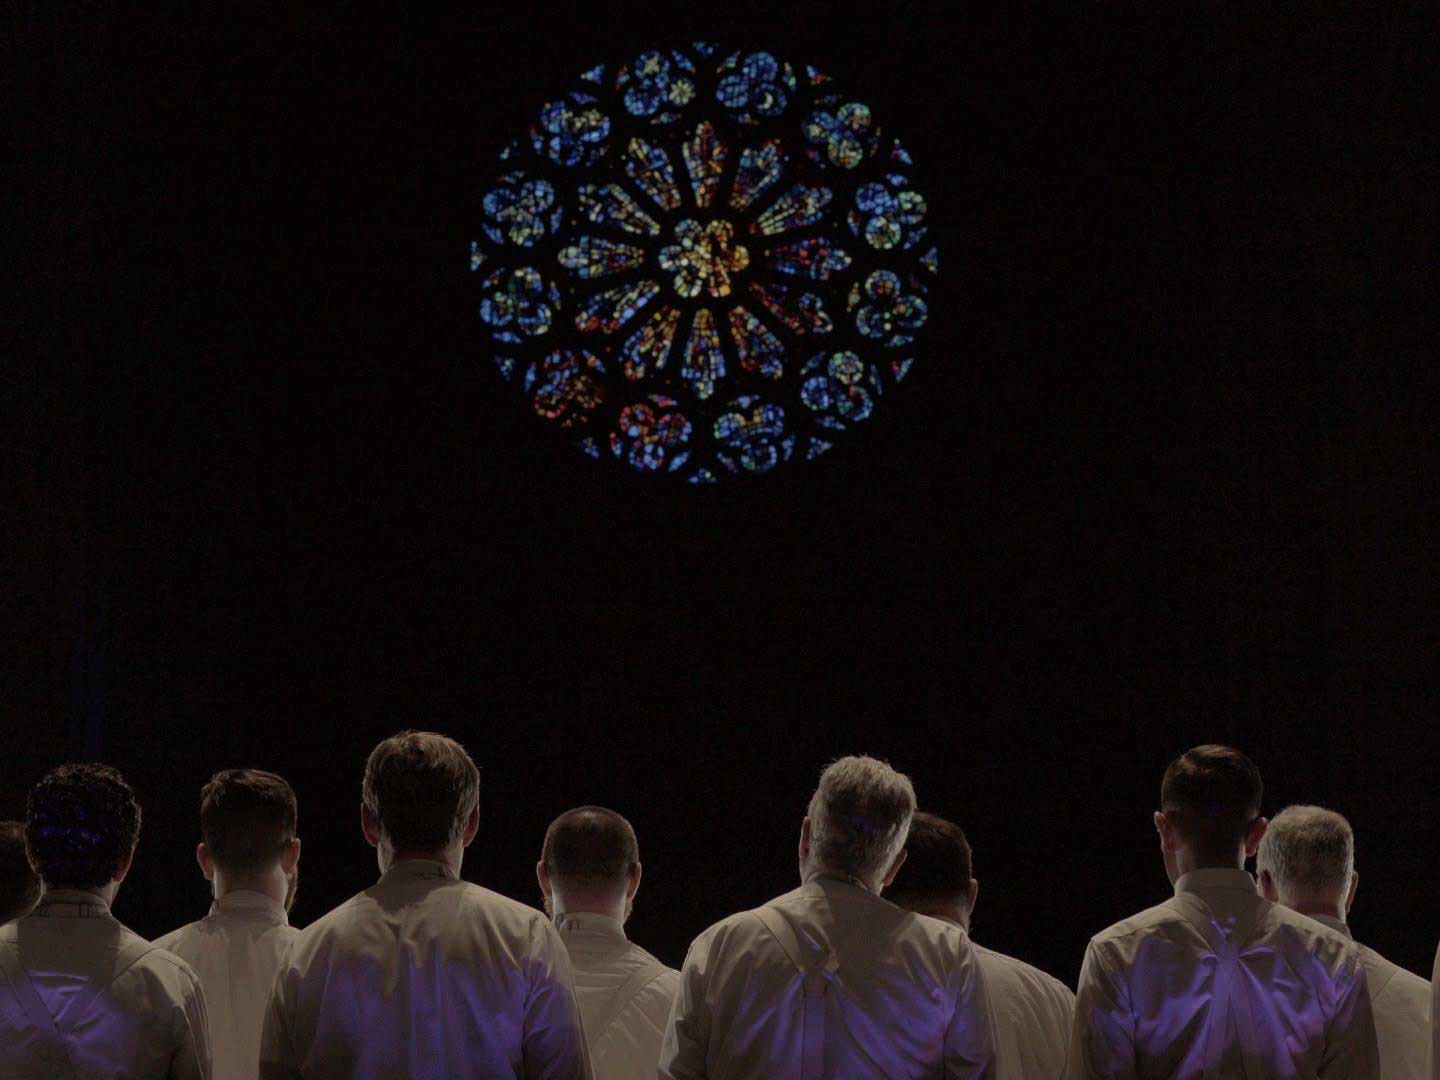 To confront a resurgence of anti-LGBTQ laws, the San Francisco Gay Men’s Chorus embarks on an unprecedented bus tour in the Deep South, celebrating music, challenging intolerance, and confronting their own dark coming out stories.Tribeca Film Festival 2019